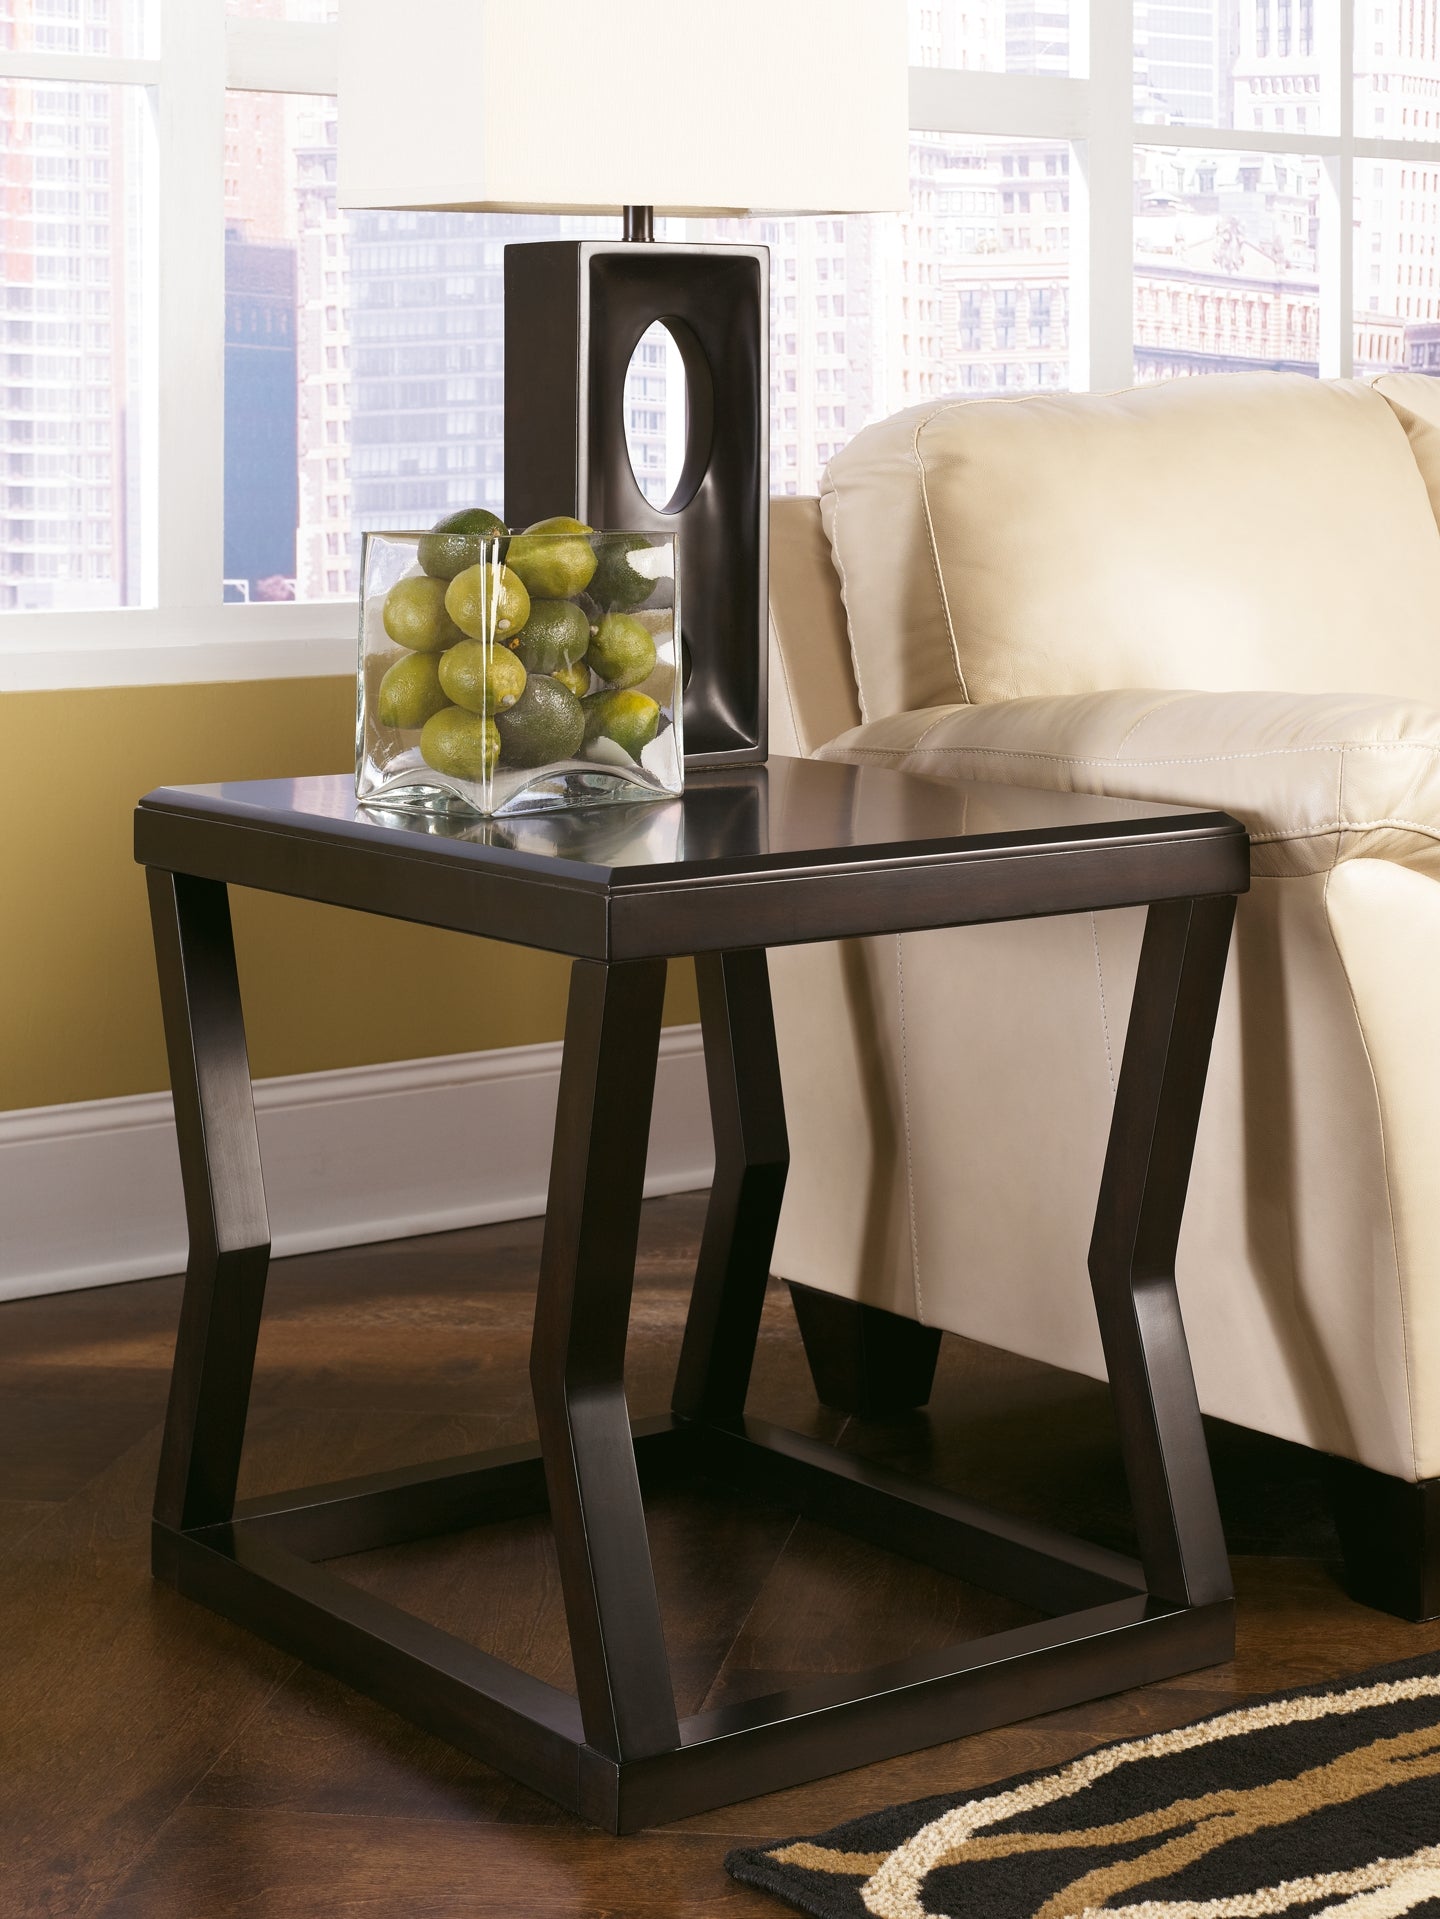 Kelton 2 End Tables at Walker Mattress and Furniture Locations in Cedar Park and Belton TX.